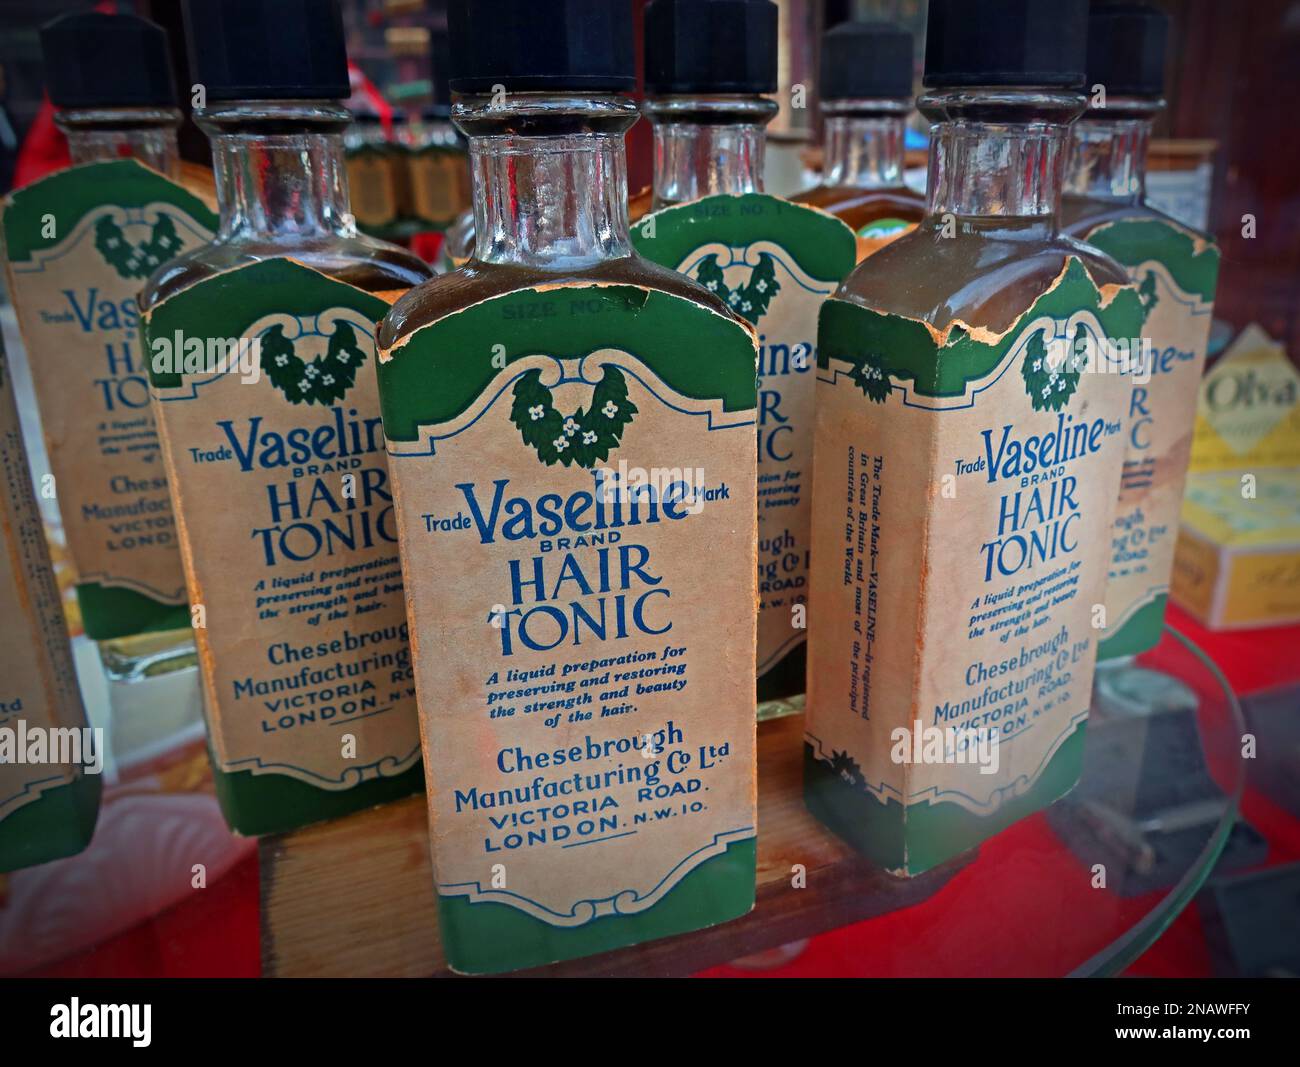 Old Bottles of medical Vaseline brand (marchio commerciale) hair tonic, Cheesebrough Manufacturing Co Ltd, Victoria Road, London NW10, England, UK Foto Stock